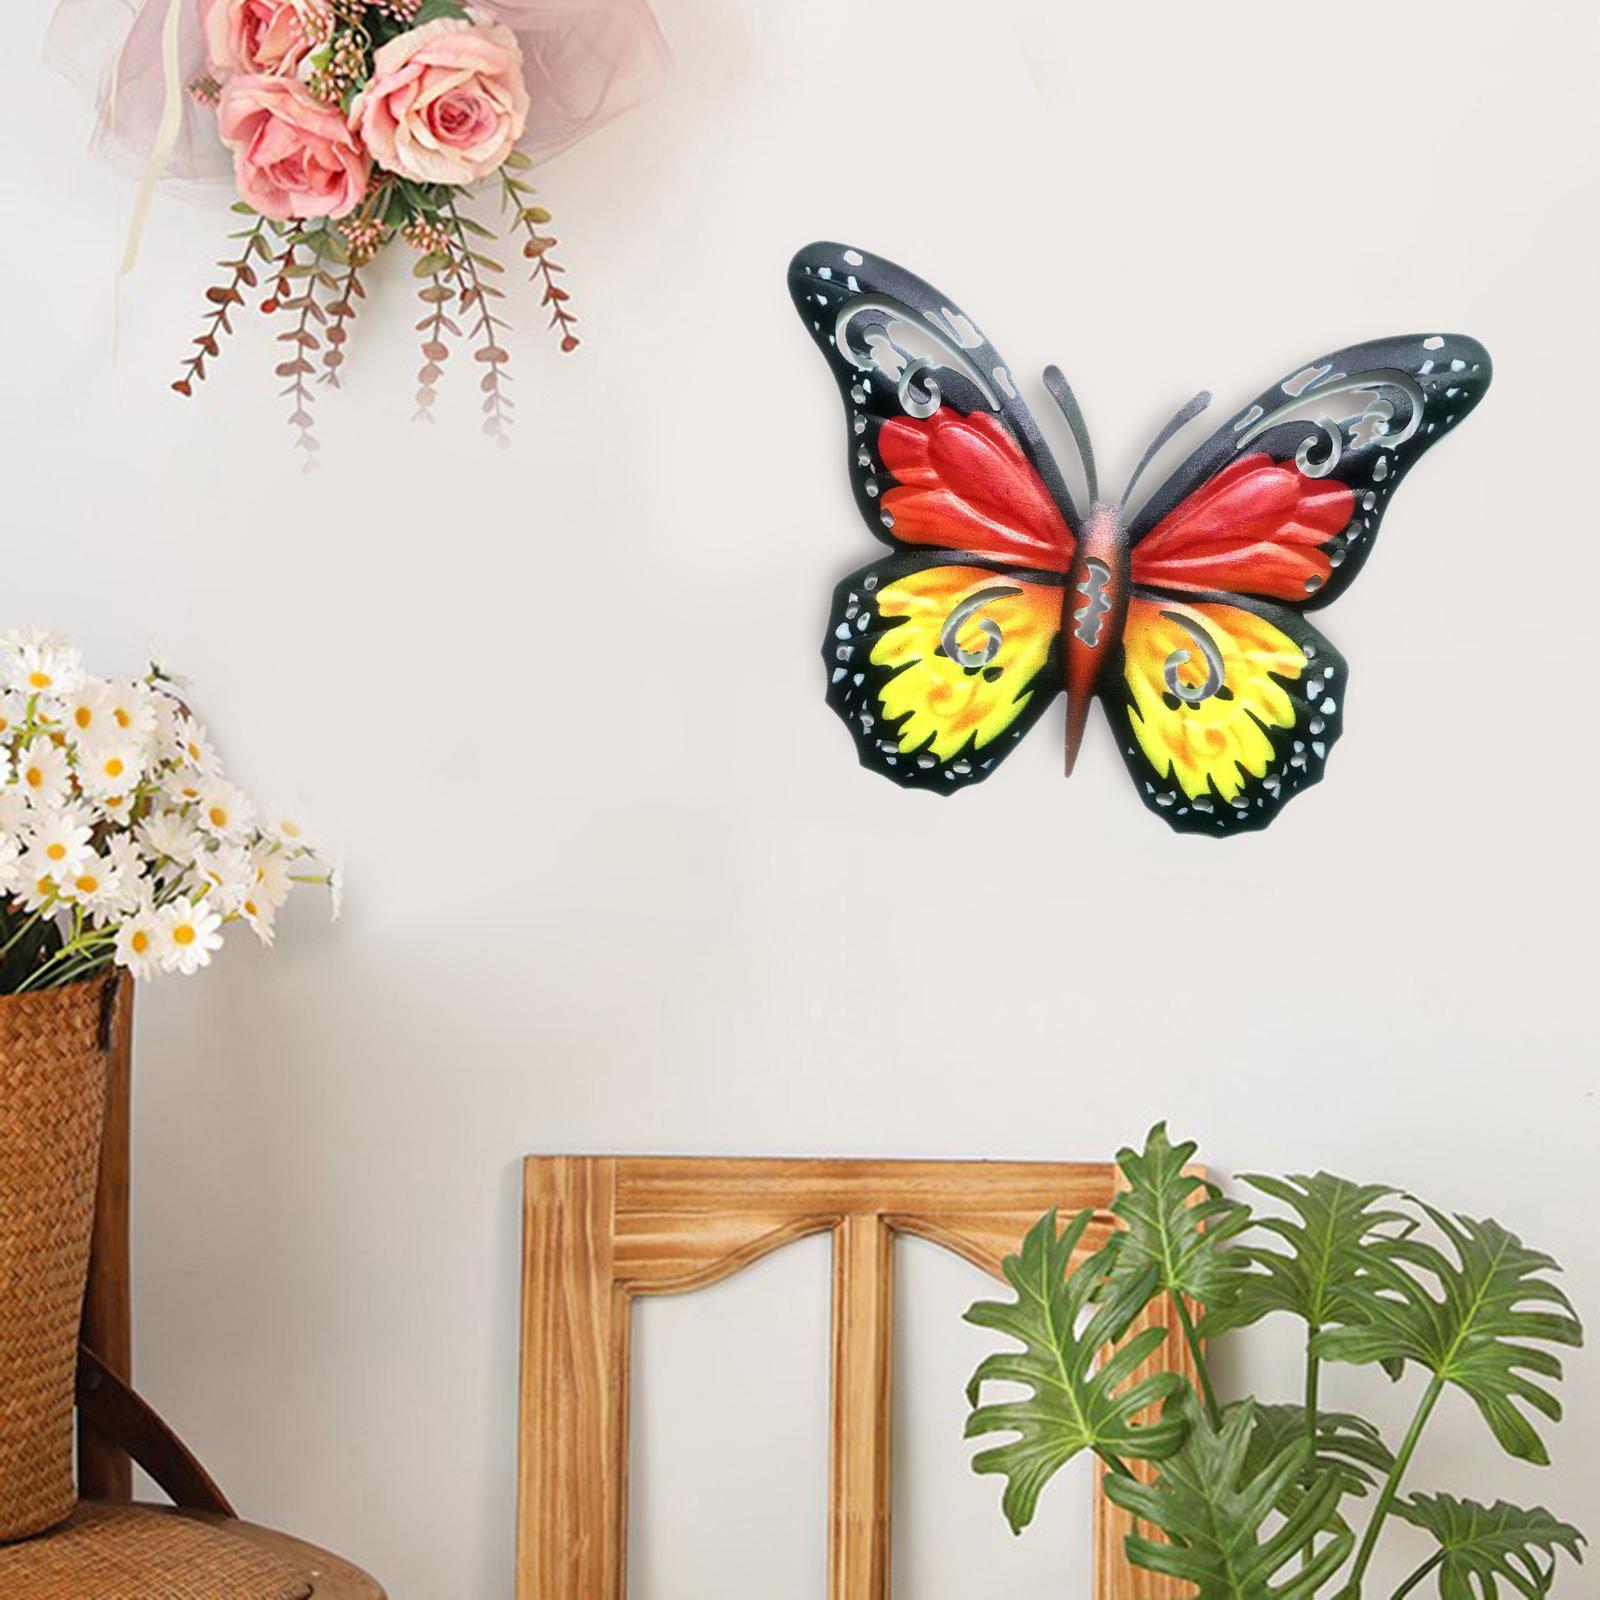 Creative Butterfly Wall Sculpture Art Decoration for Indoor Bedroom Yard Red Yellow